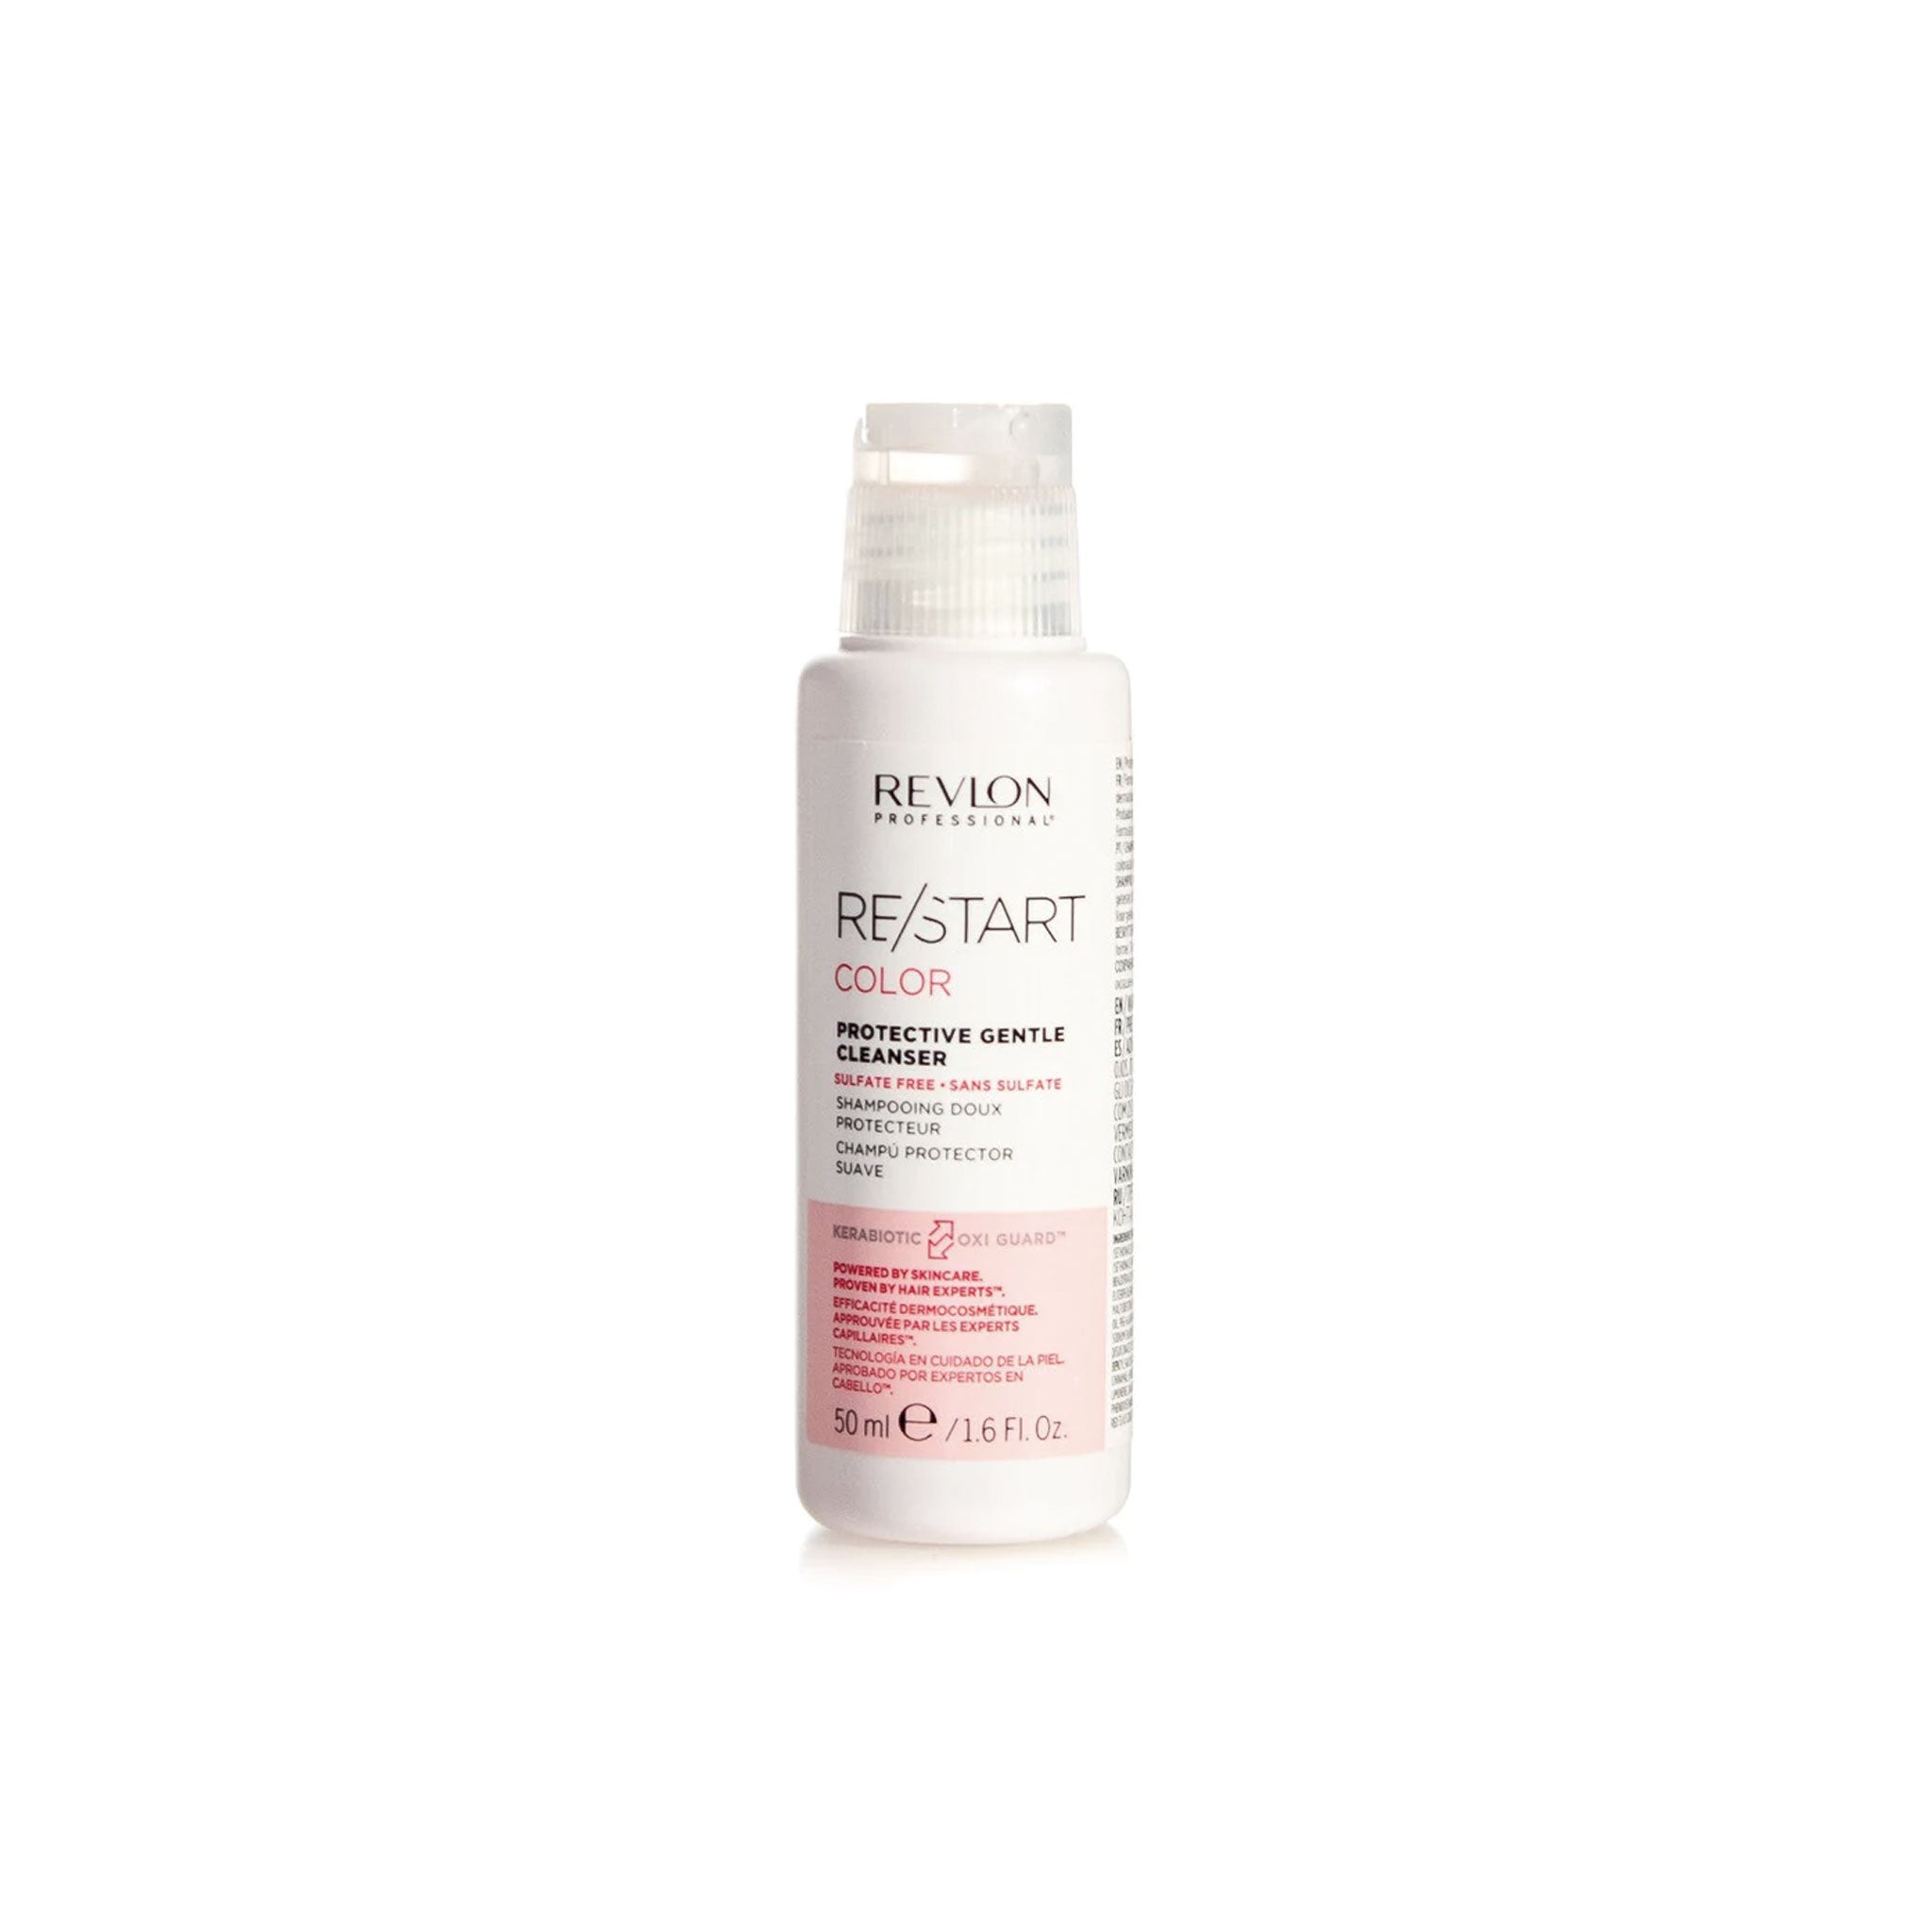 Re/start™ Color Protective Gentle Cleanser - Travel Size